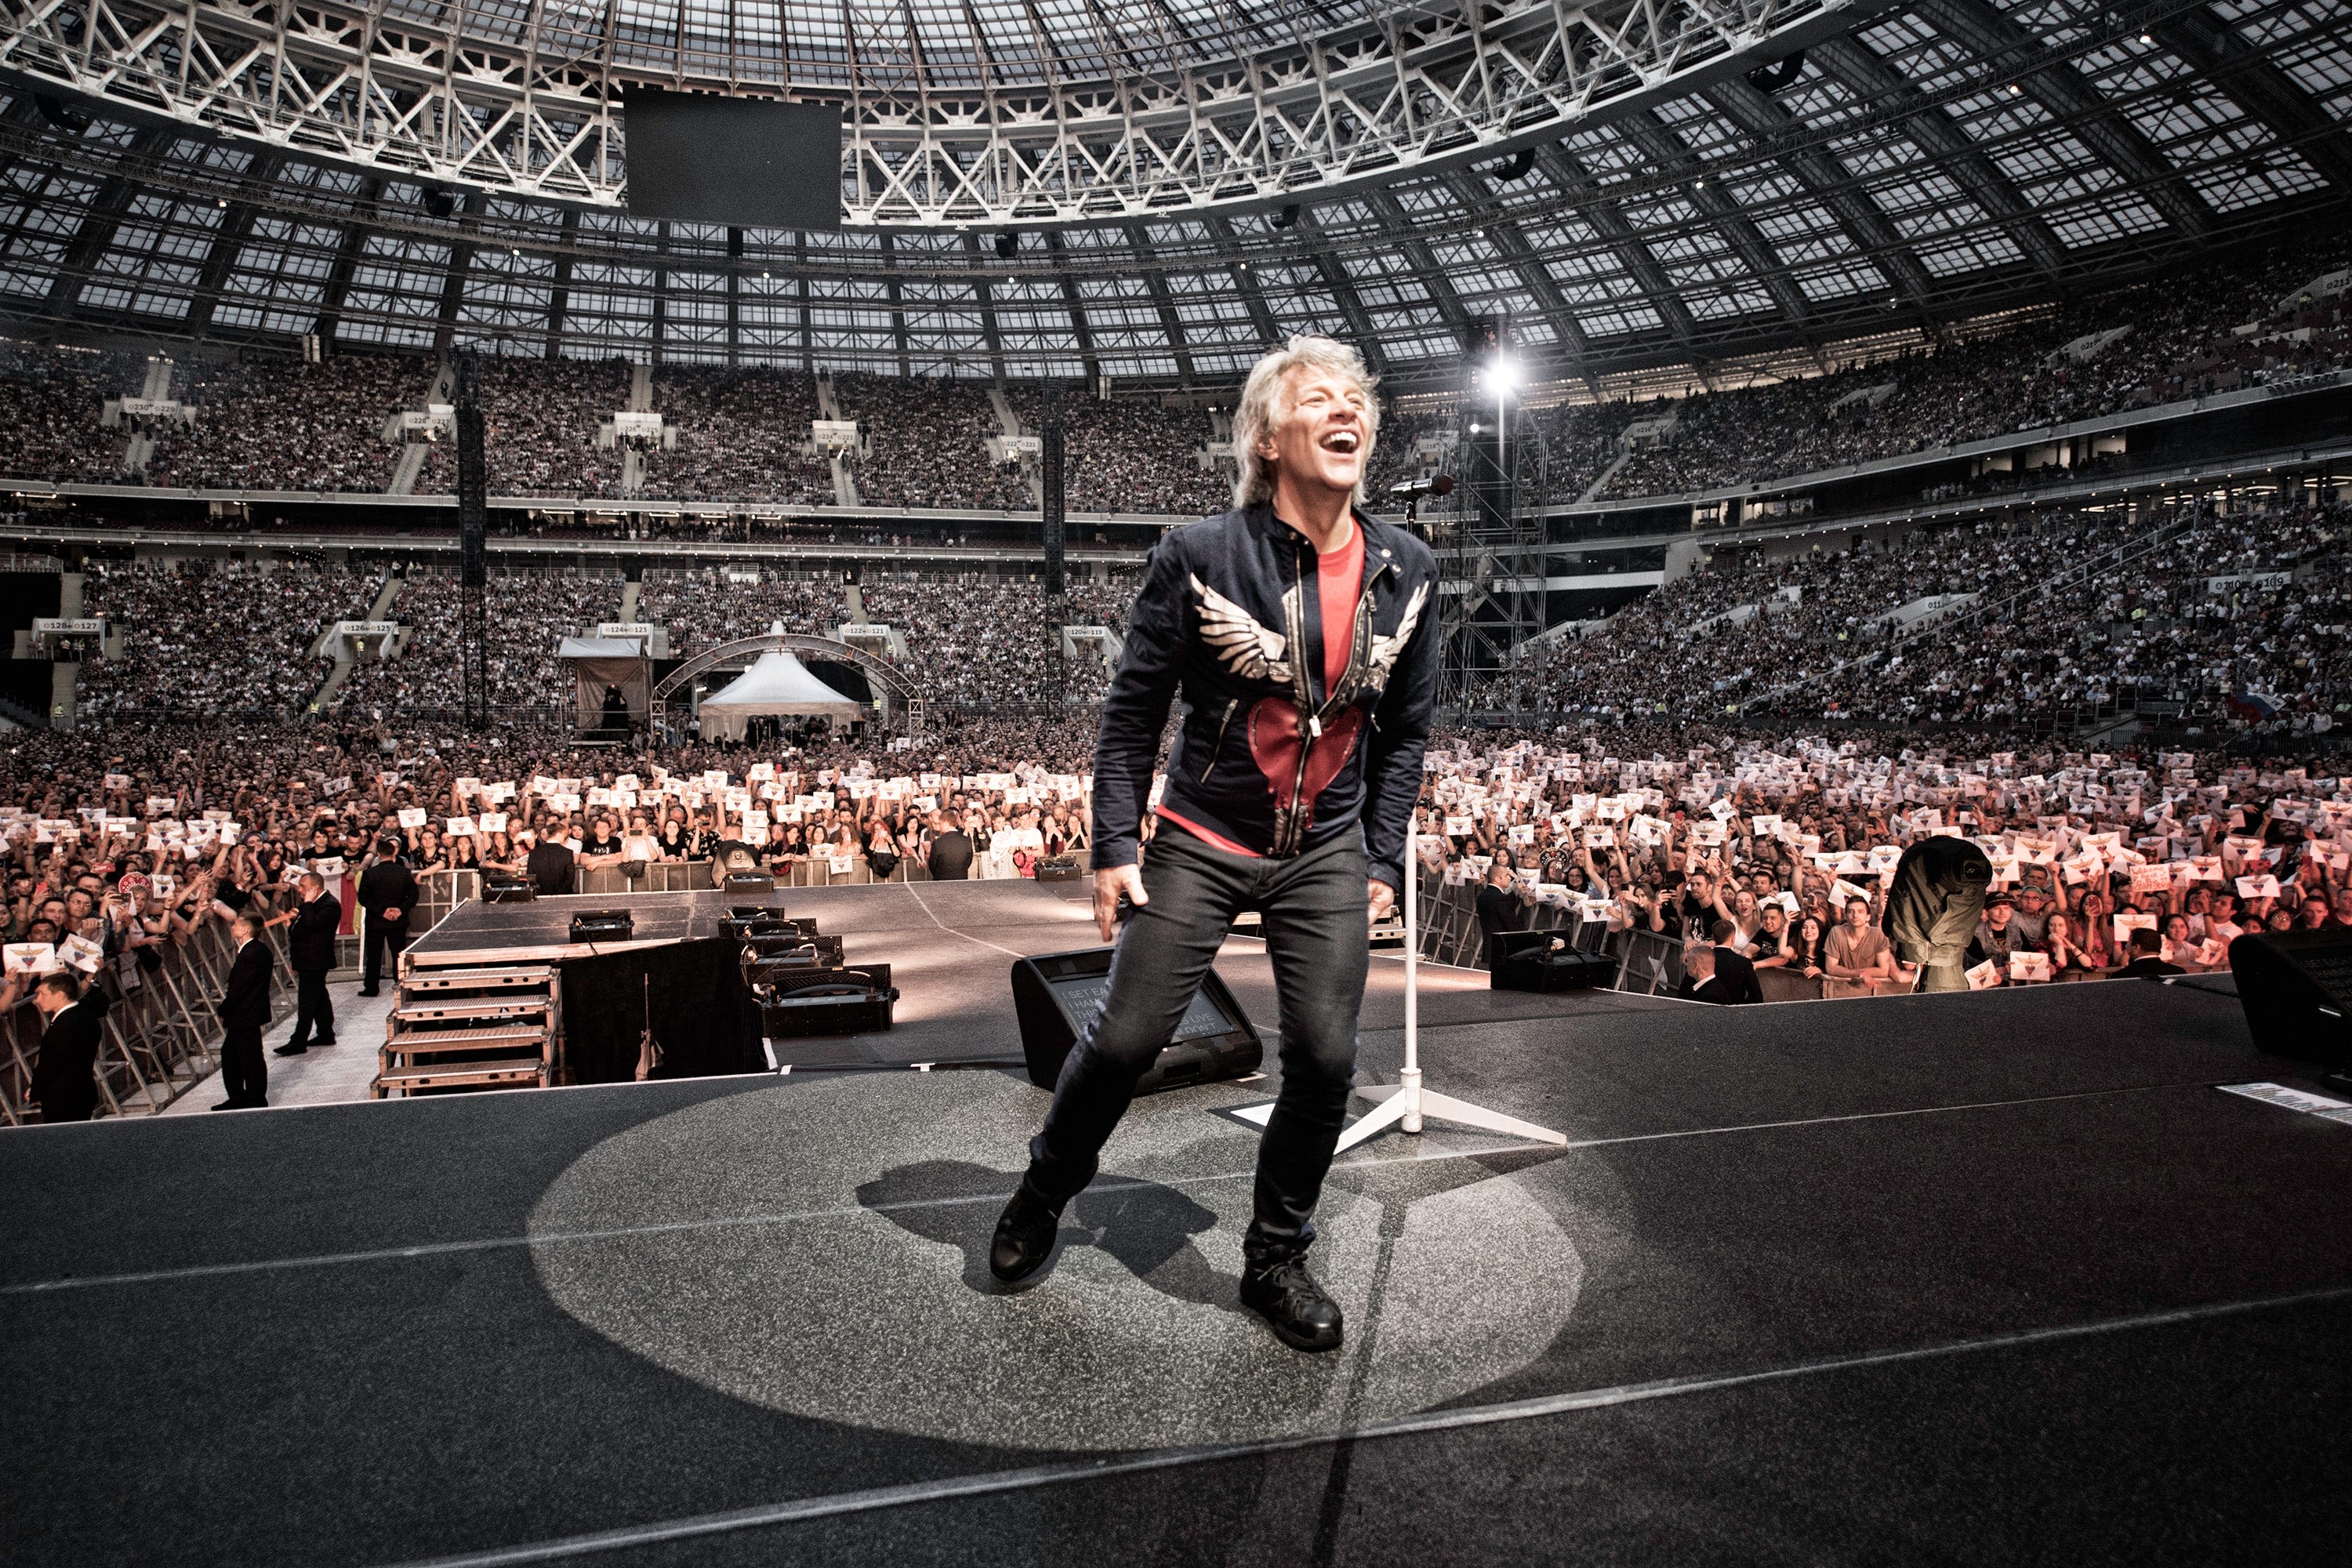 Jon Bon Jovi is ready to sing live again. 'It's going to happen ... very soon'